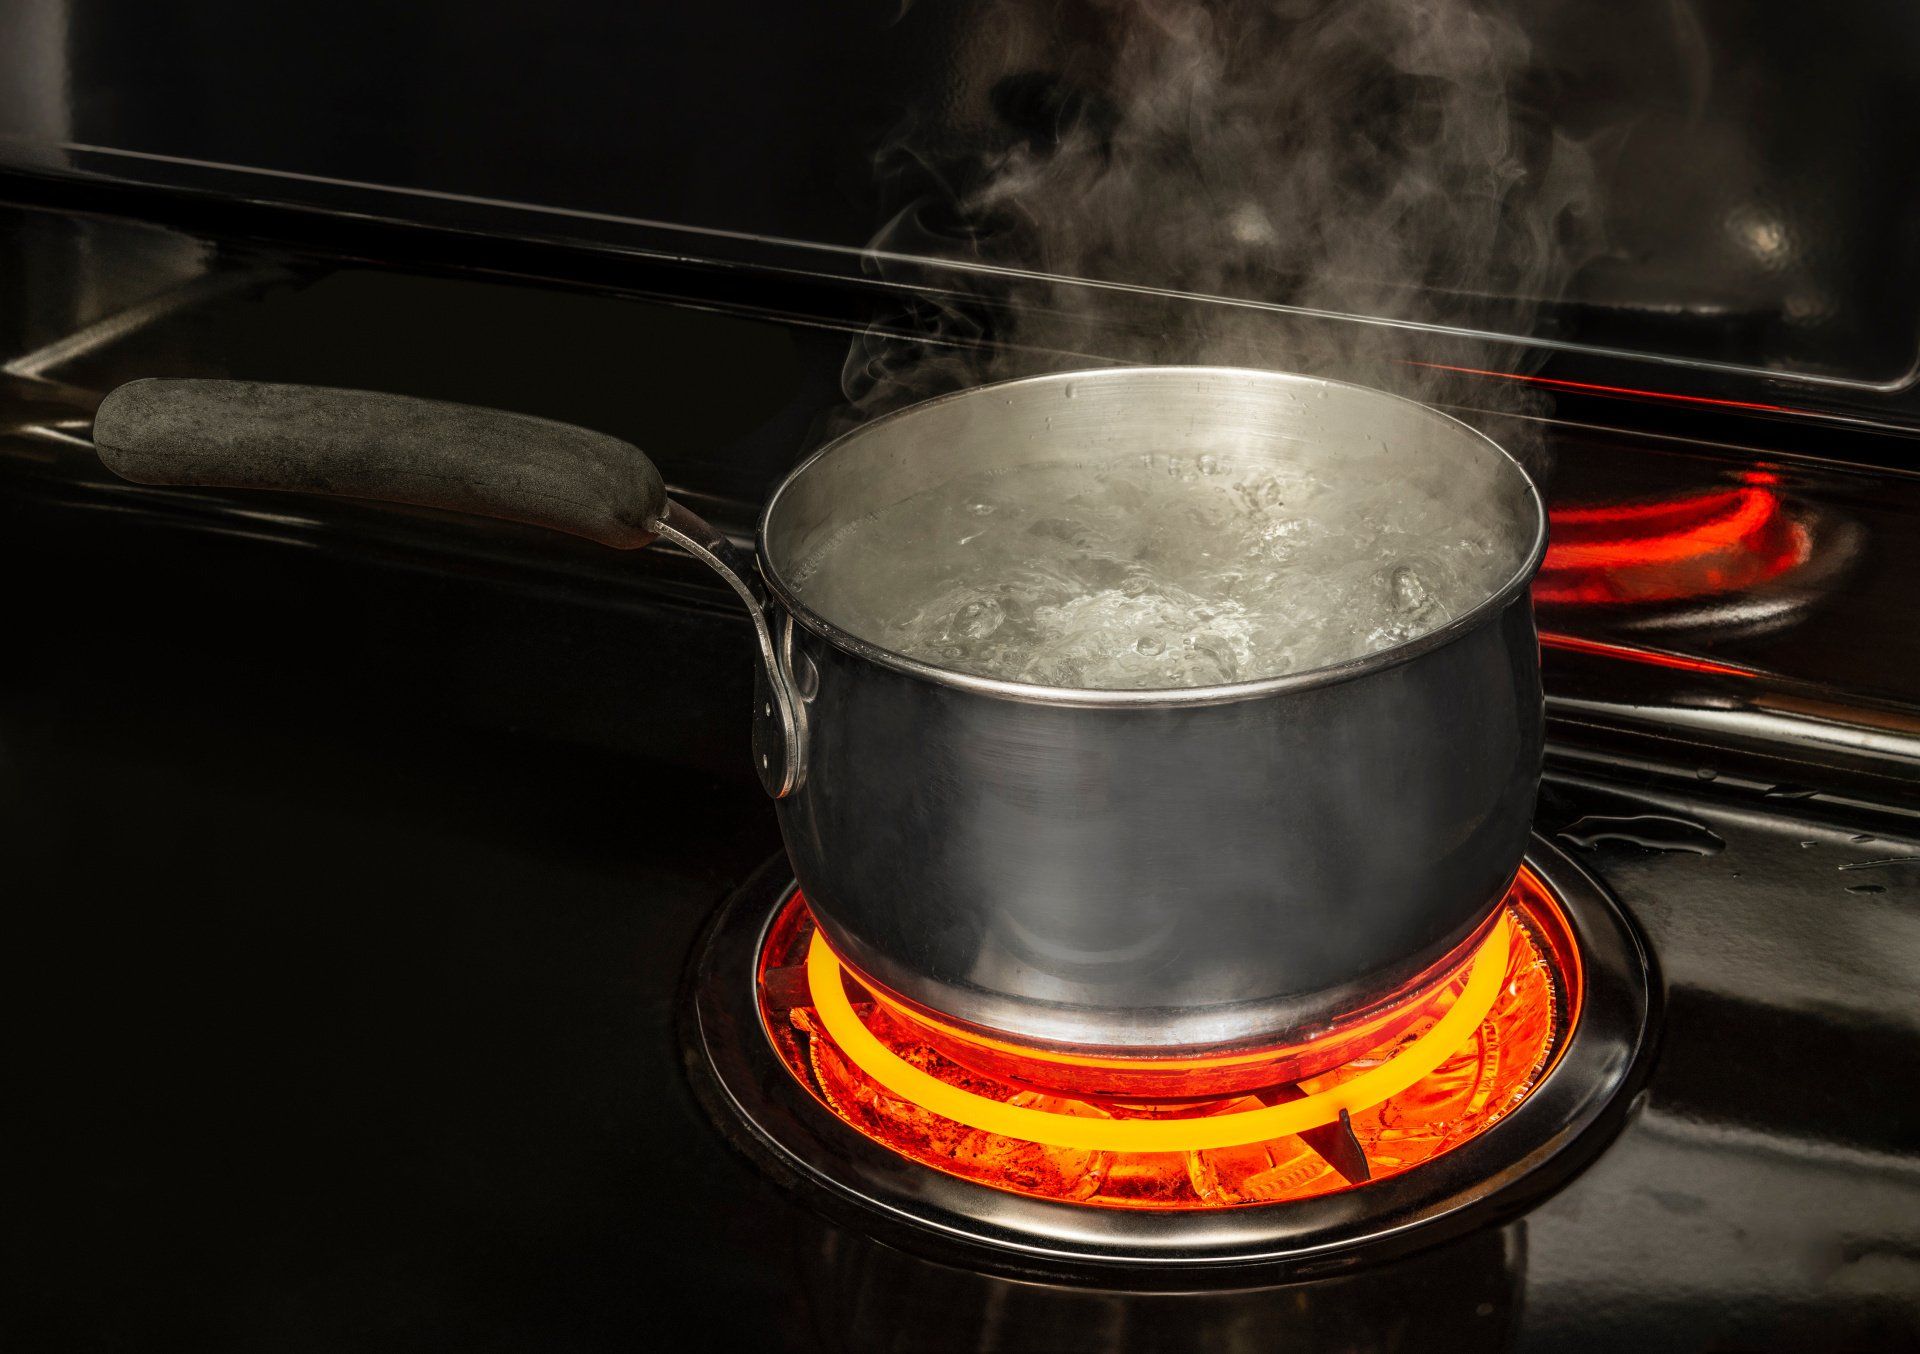 Pot of water boiling on electric stove